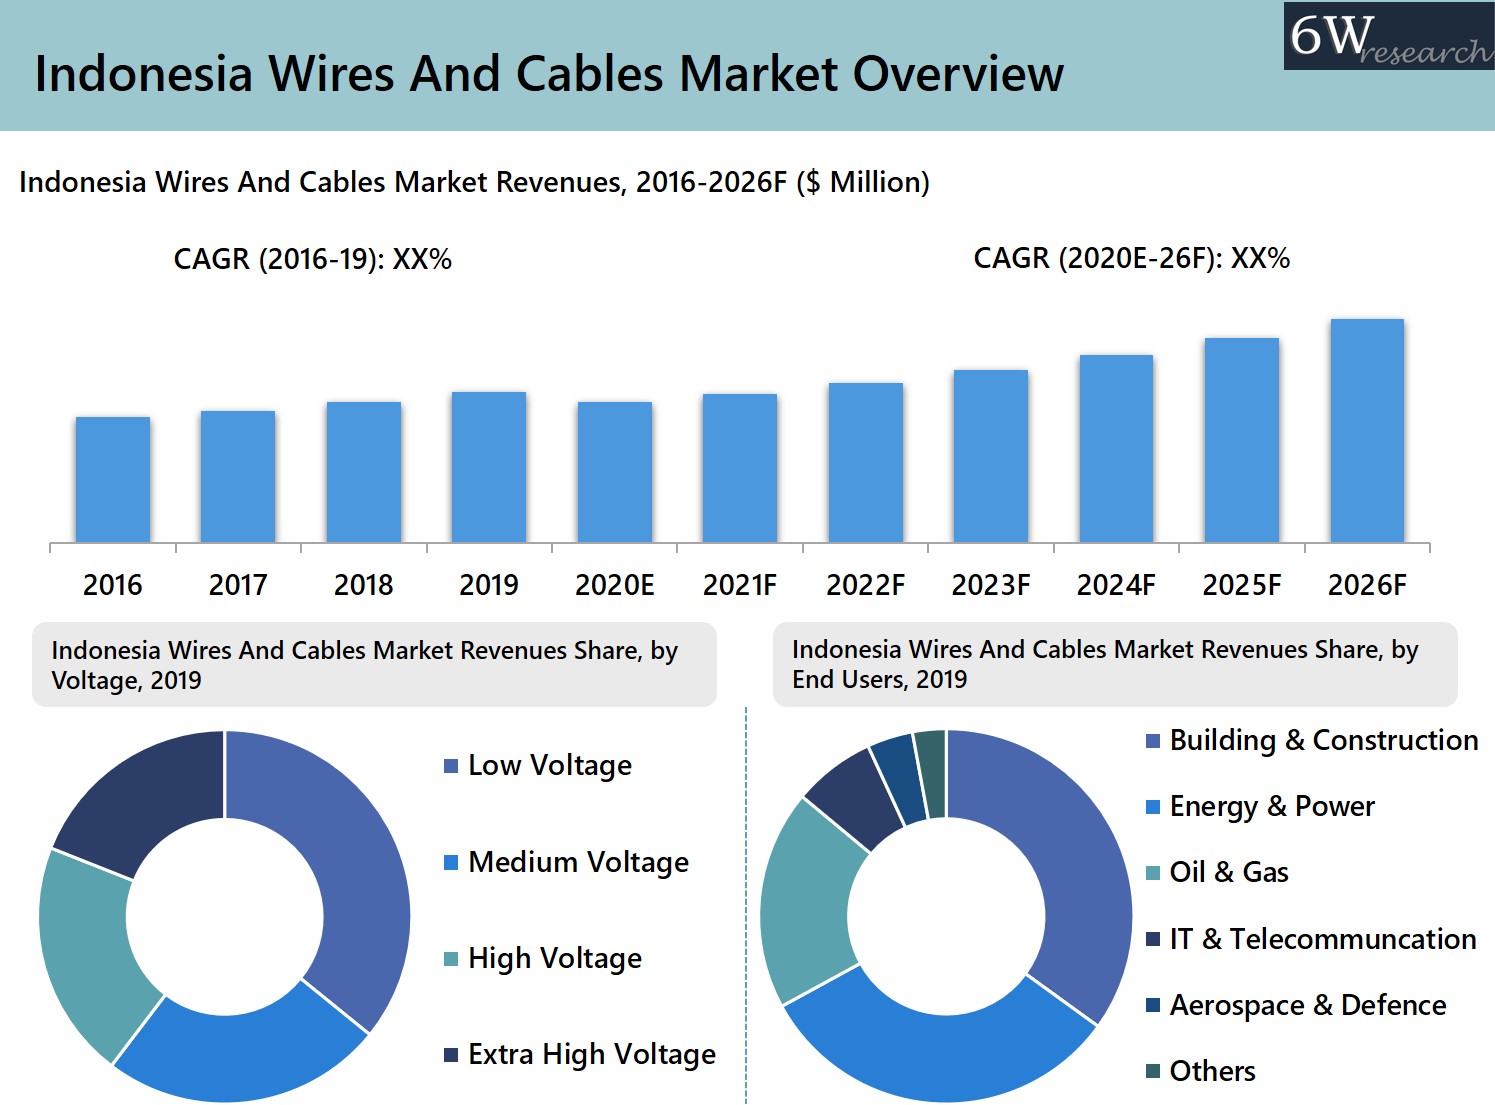 Indonesia Wires And Cables Market